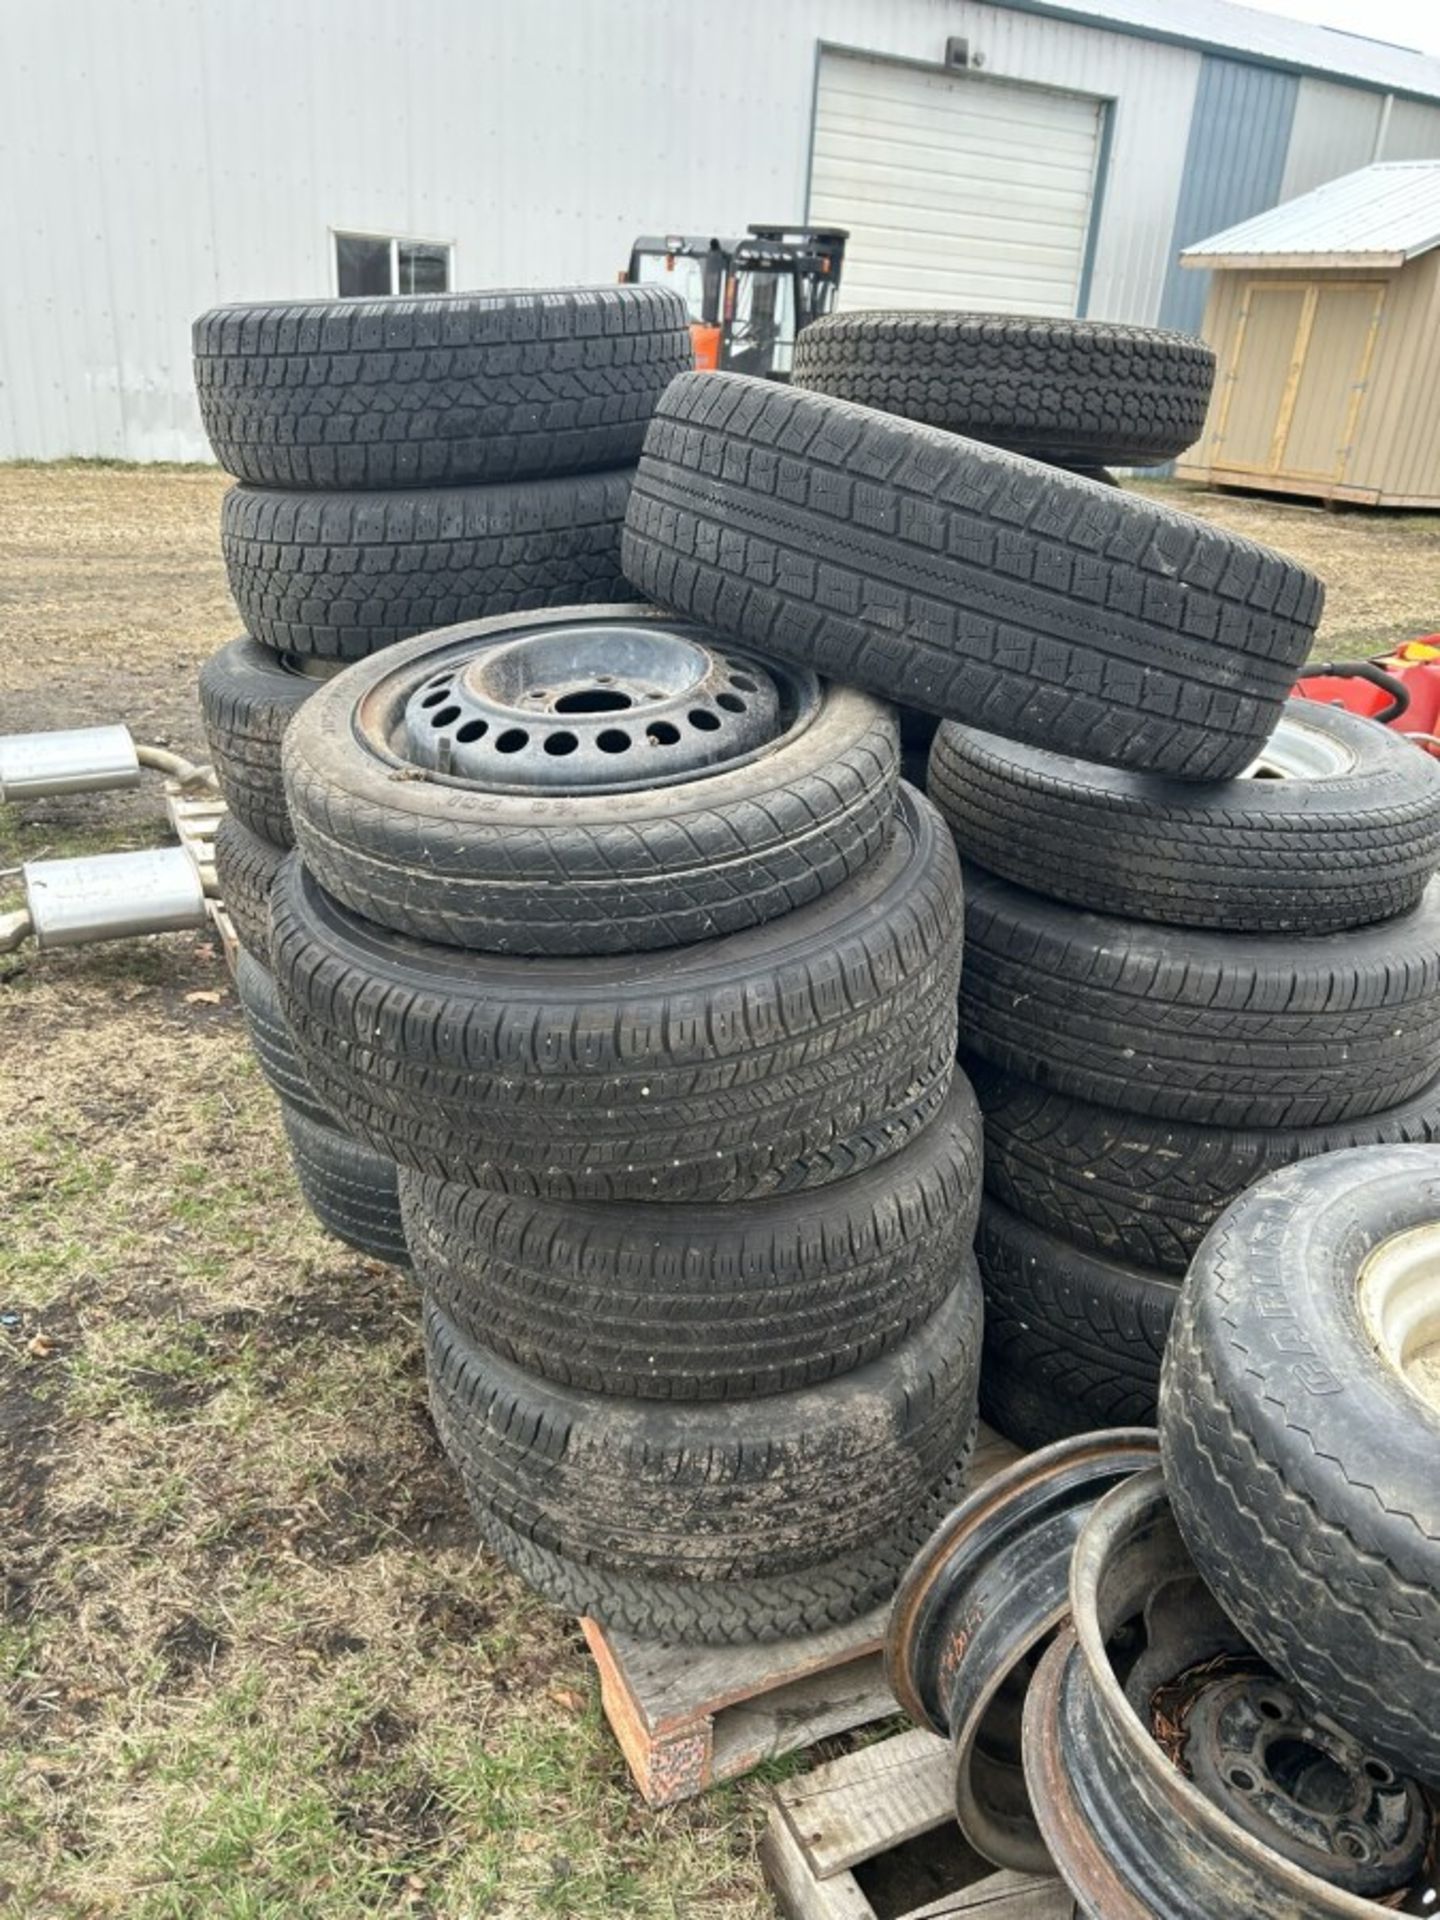 L/O ASSORTED TIRES AND RIMS - Image 7 of 7